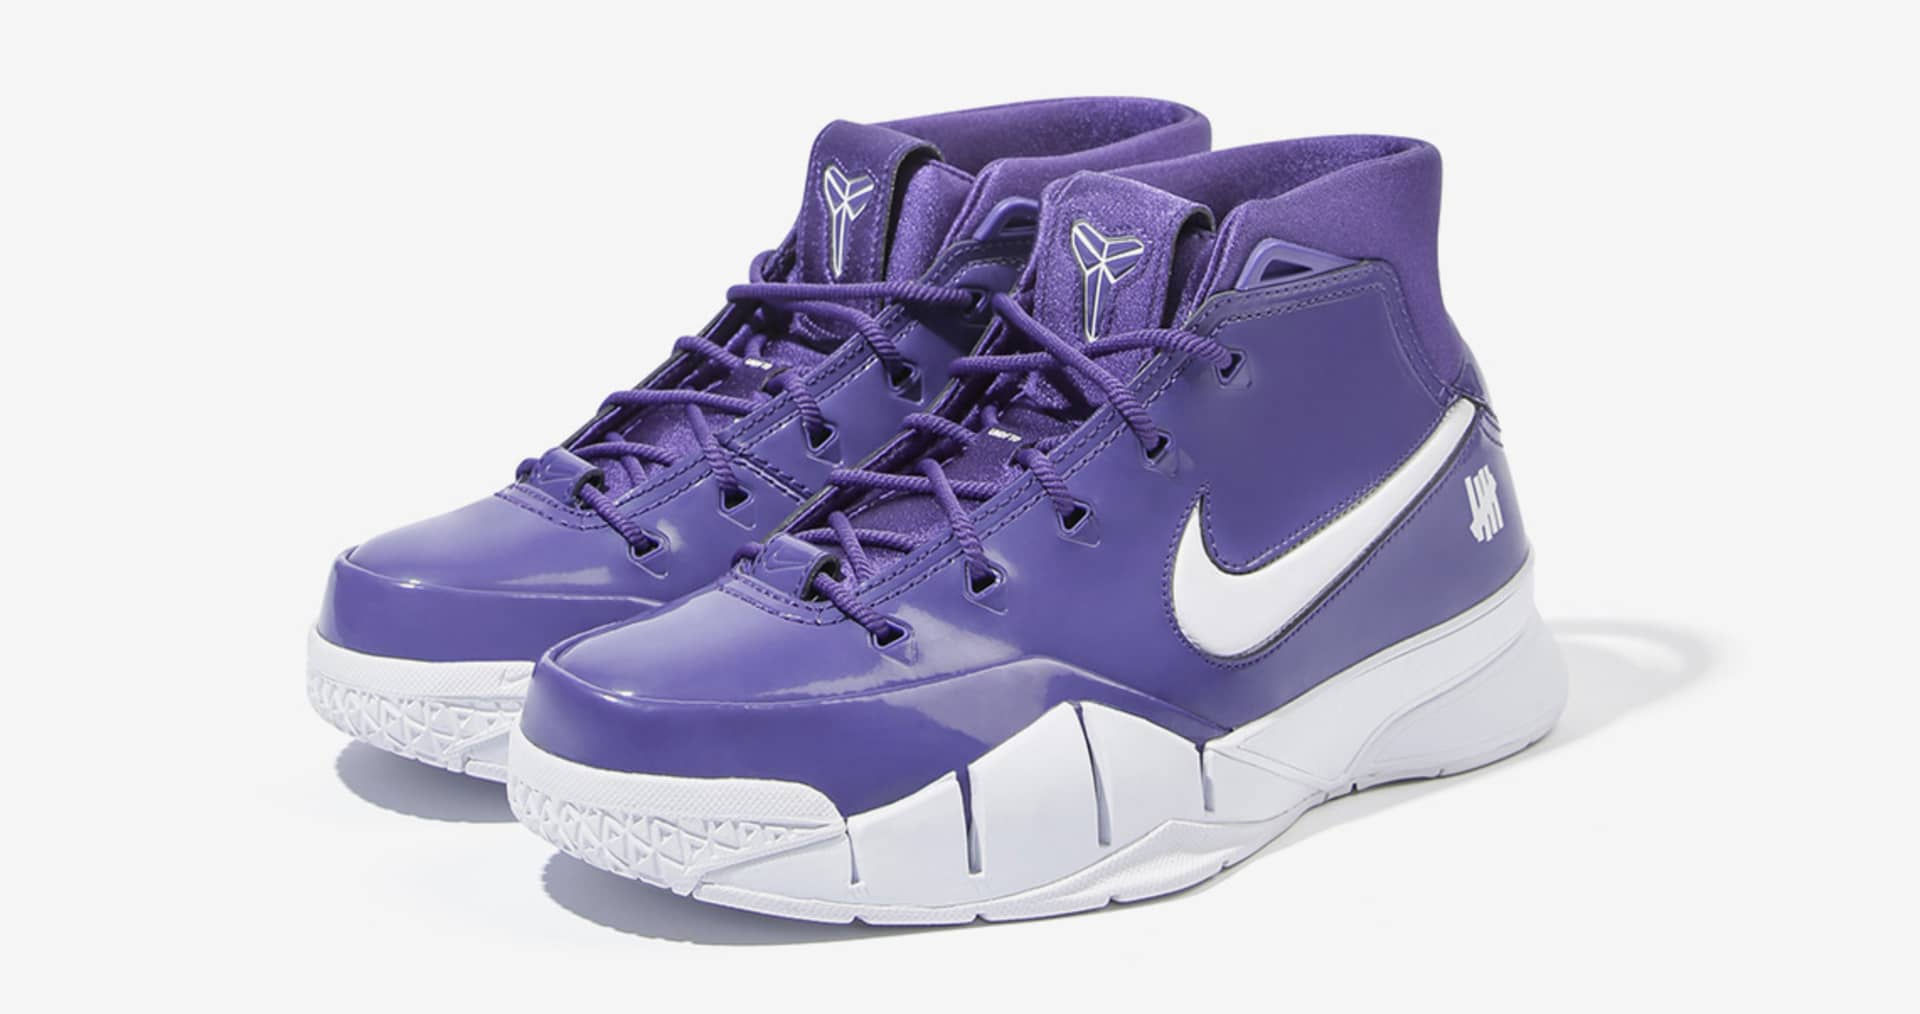 Undefeated x Nike Kobe 1 Protro “Purple” (Friends and Family)